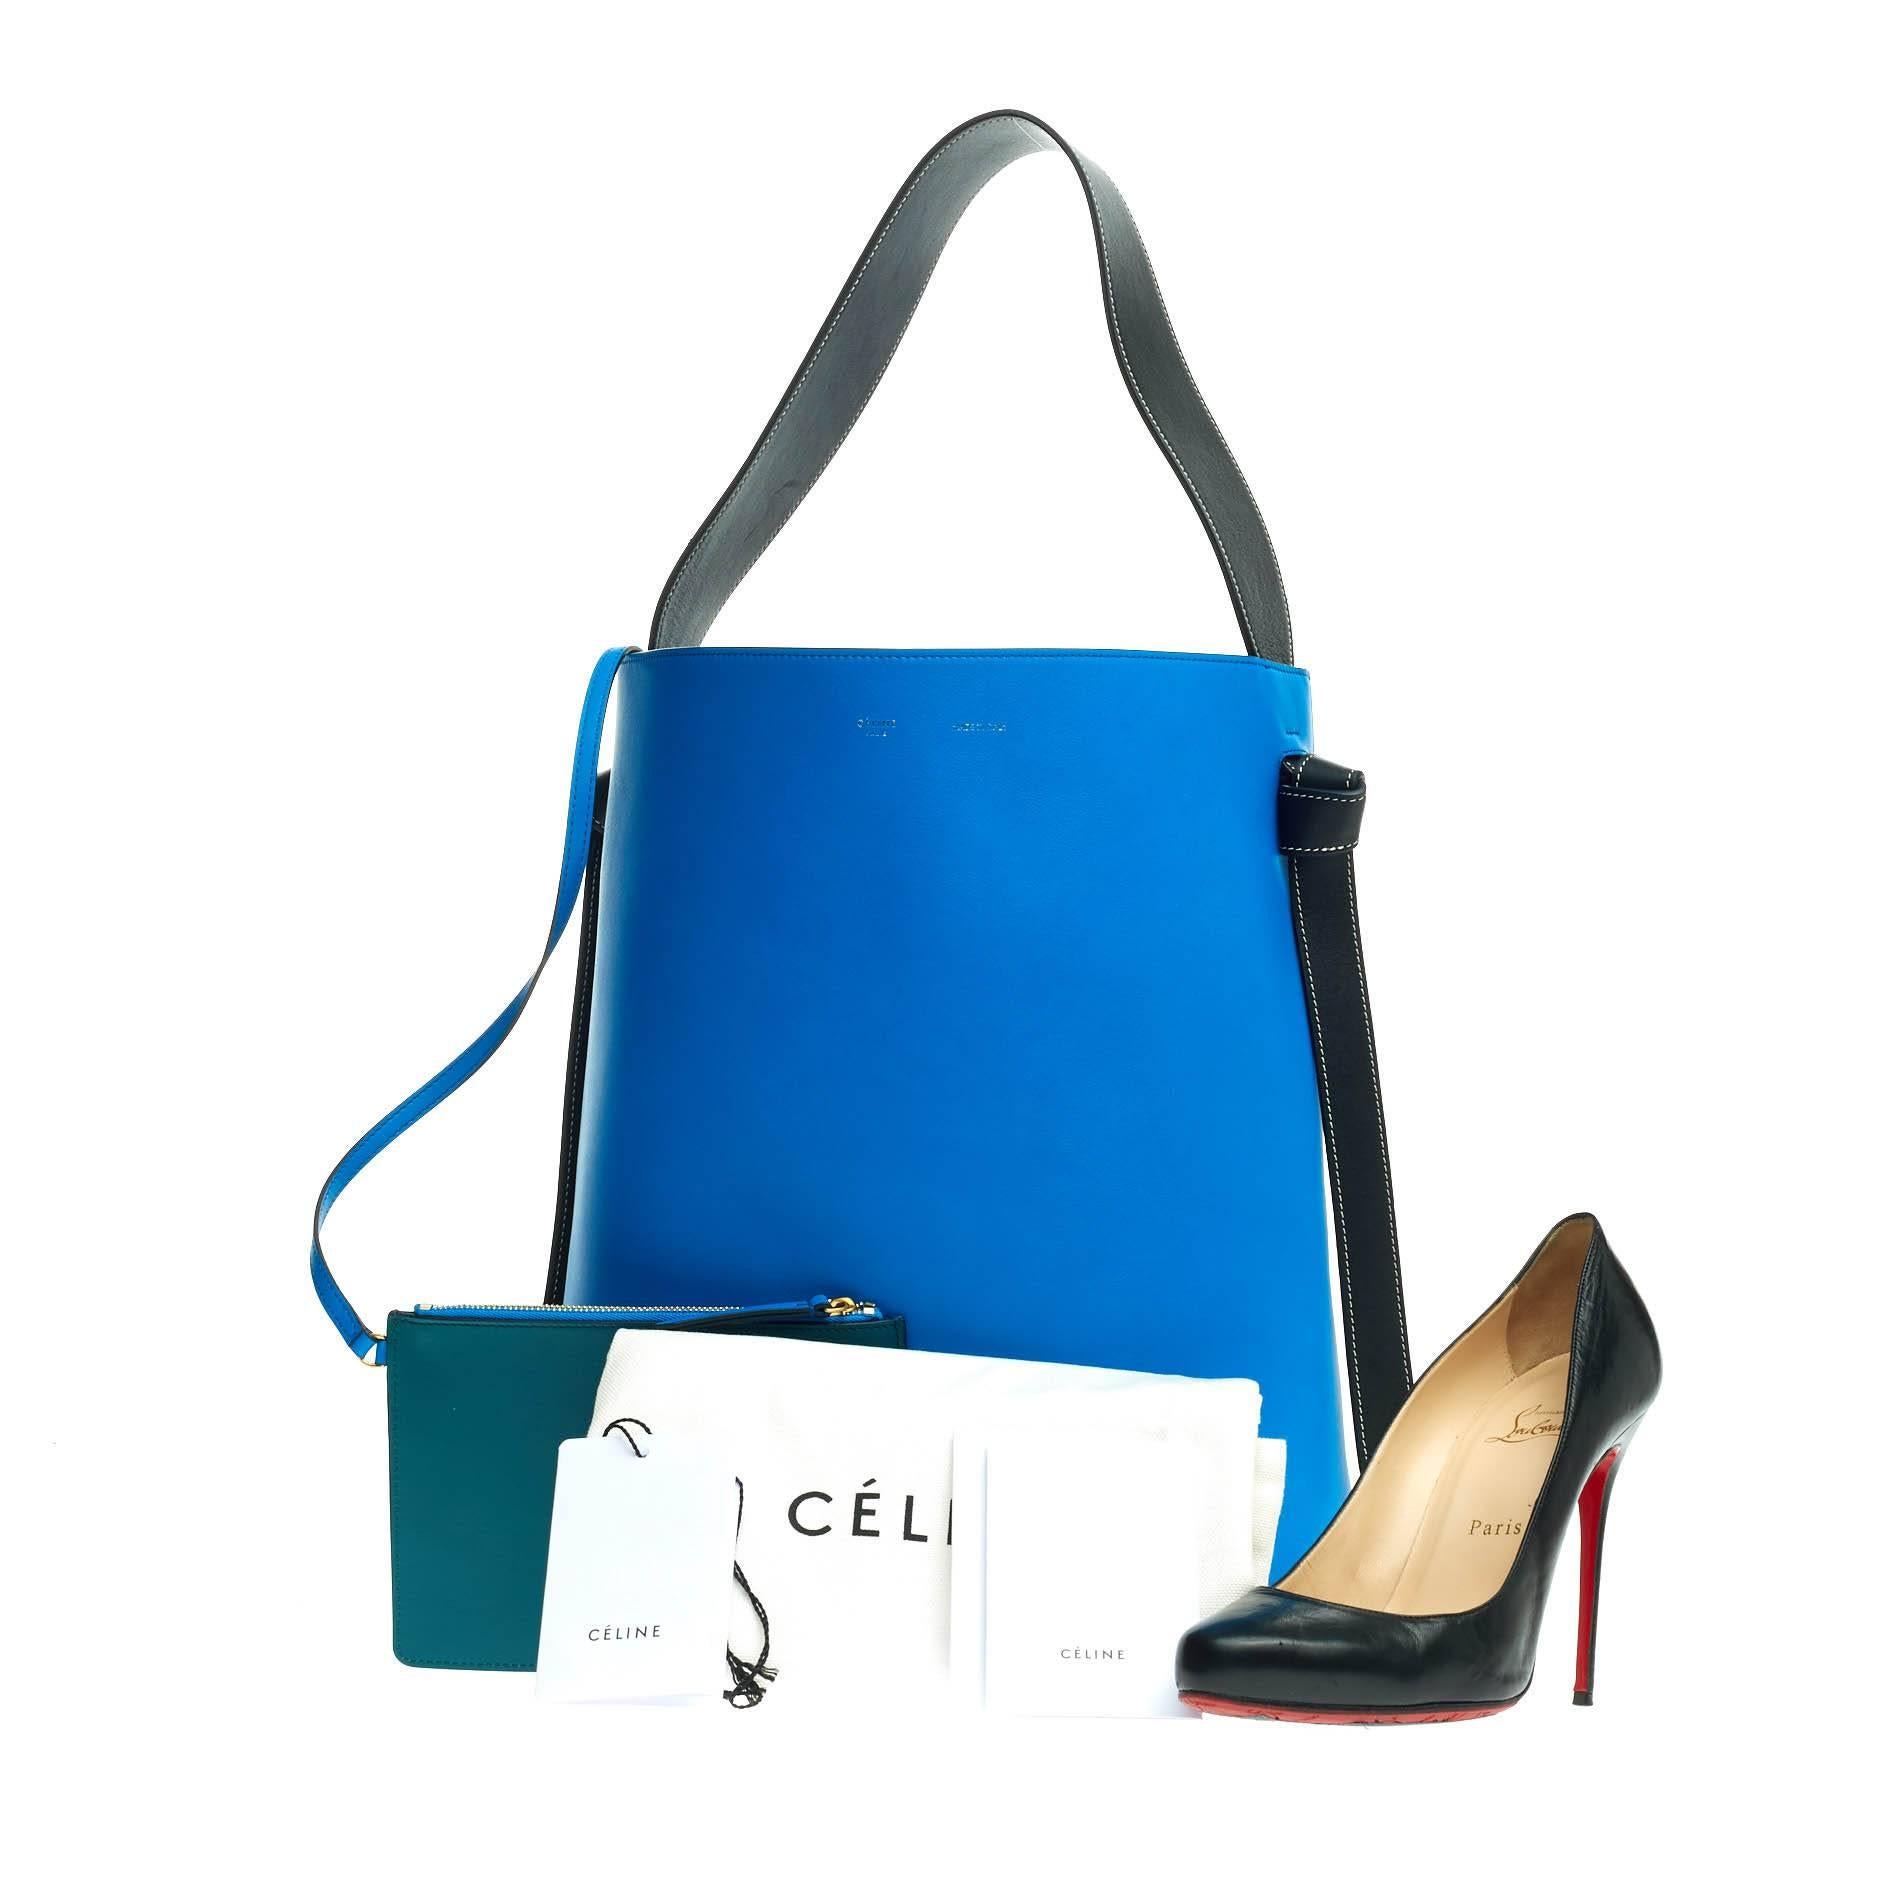 This authentic Celine Twisted Cabas Tote Calfskin Small presented from the brand's Spring 2016 is a minimalist, youthful accessory made for everyday excursions. Crafted from bright blue and peacock green calfskin leather, this fresh tote features